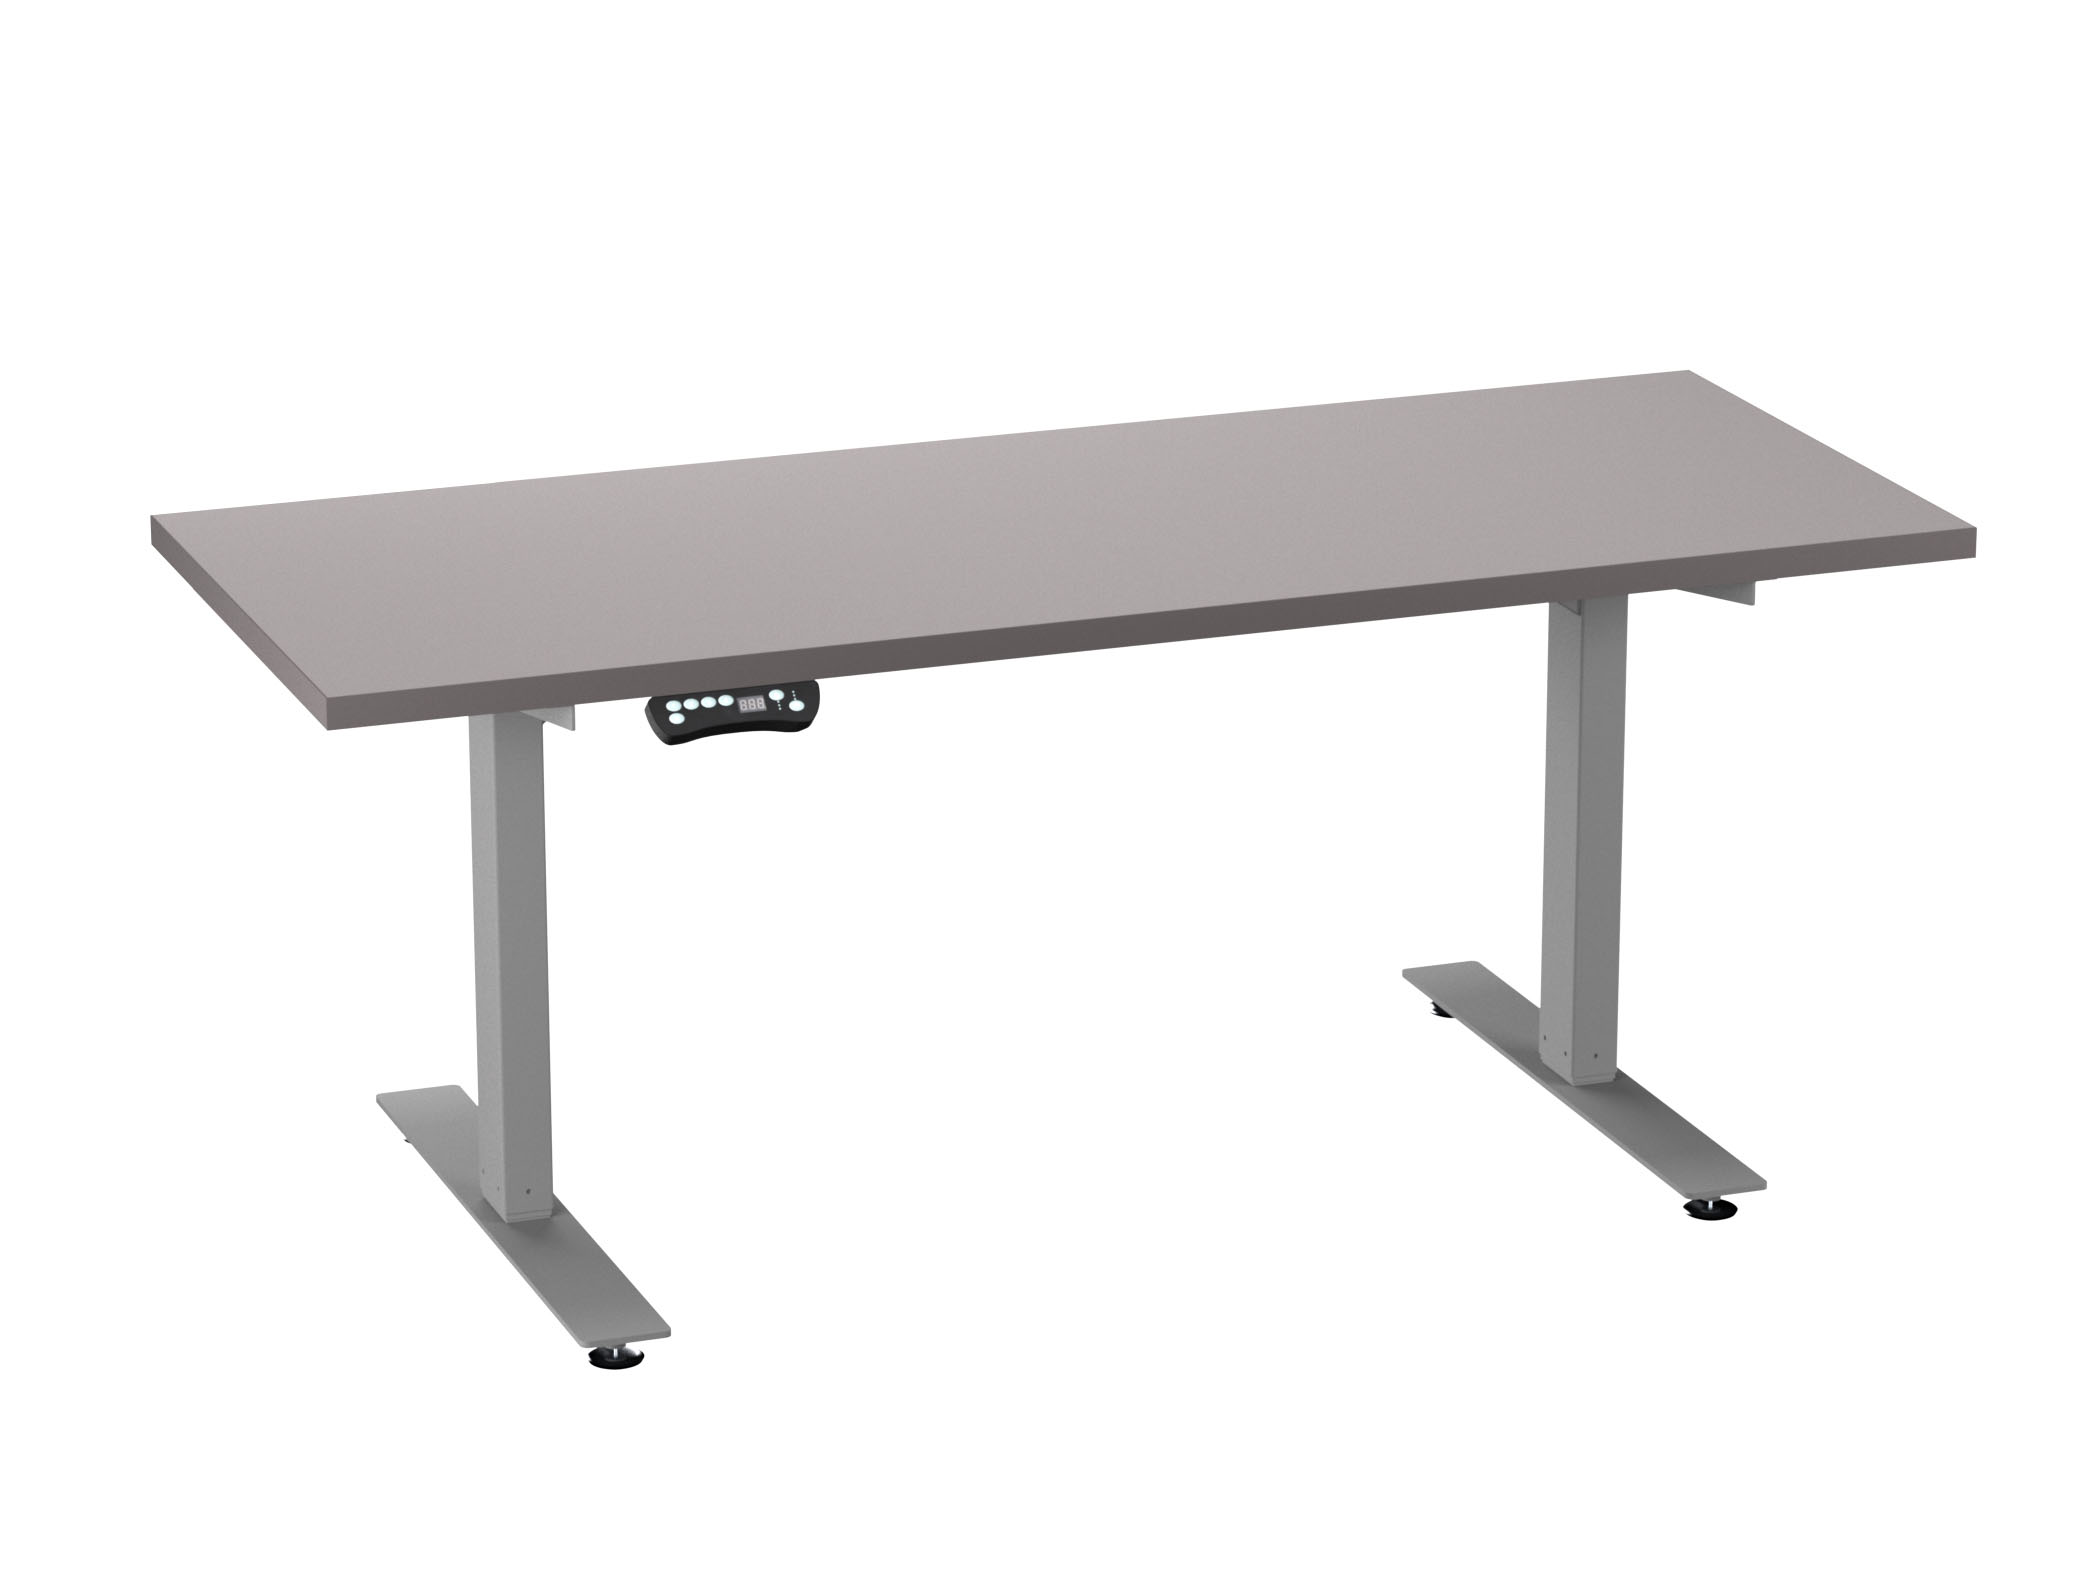 Executive Furniture from Compel - HiLo table base